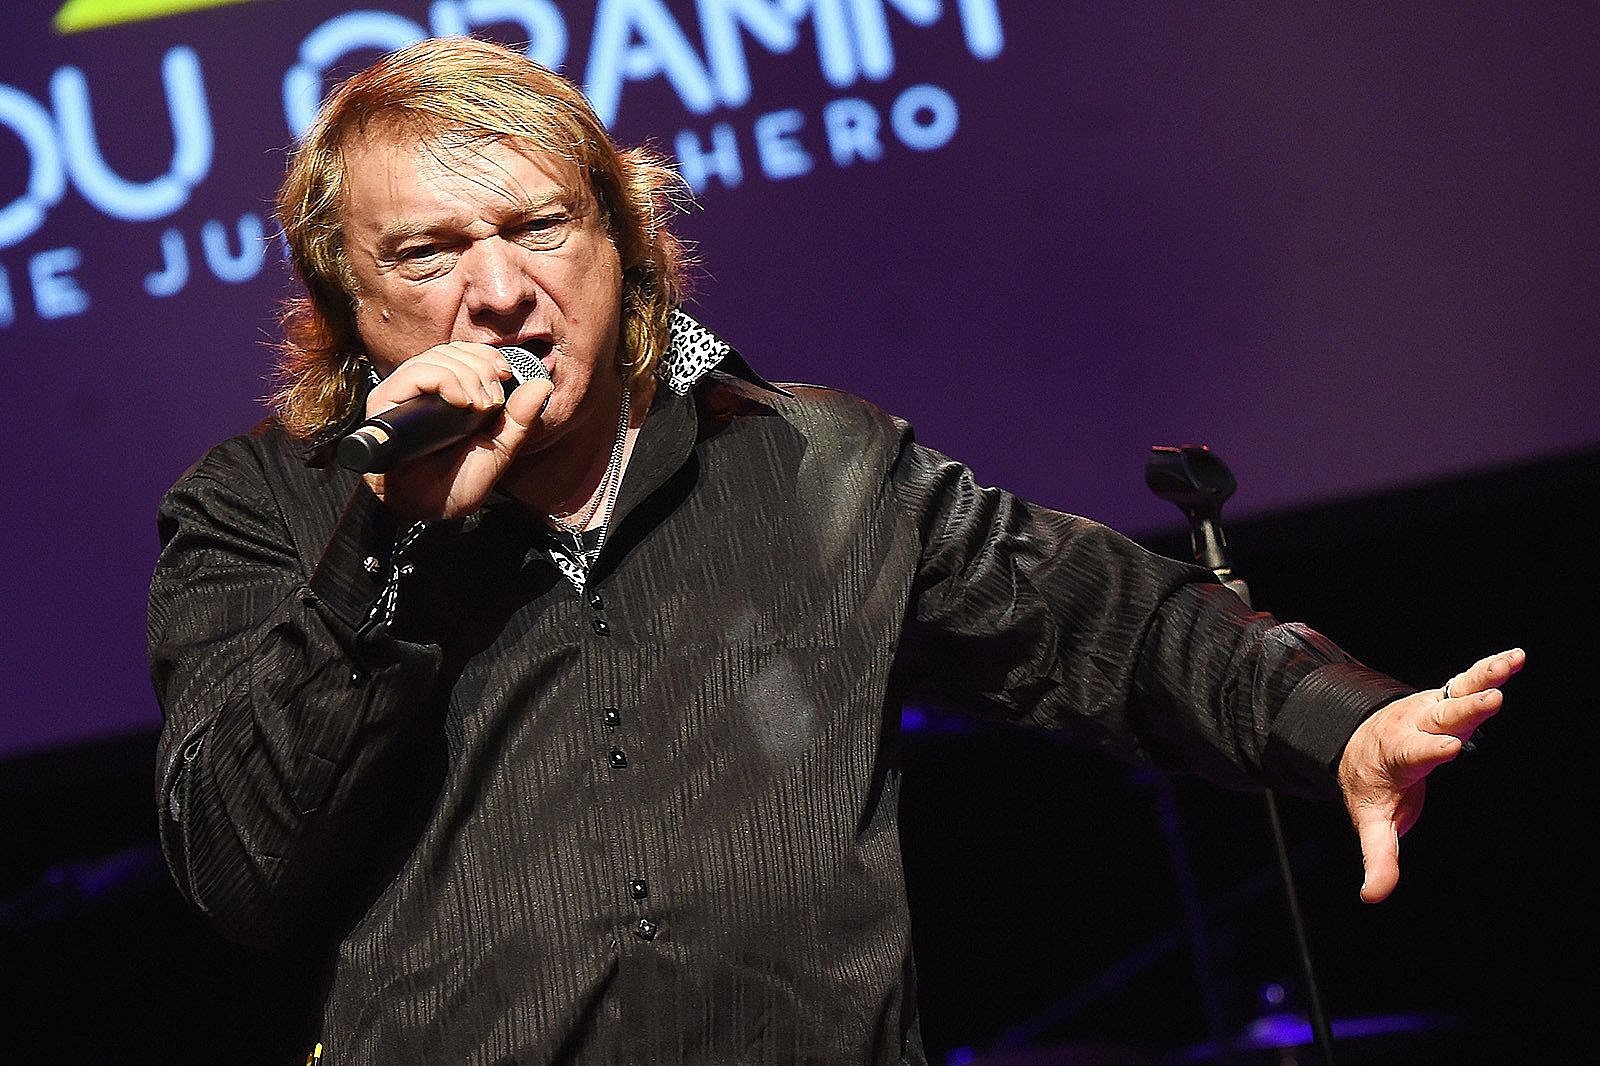 Lou Gramm: Foreigner Not in Rock Hall Due to ‘Personal Vendetta’